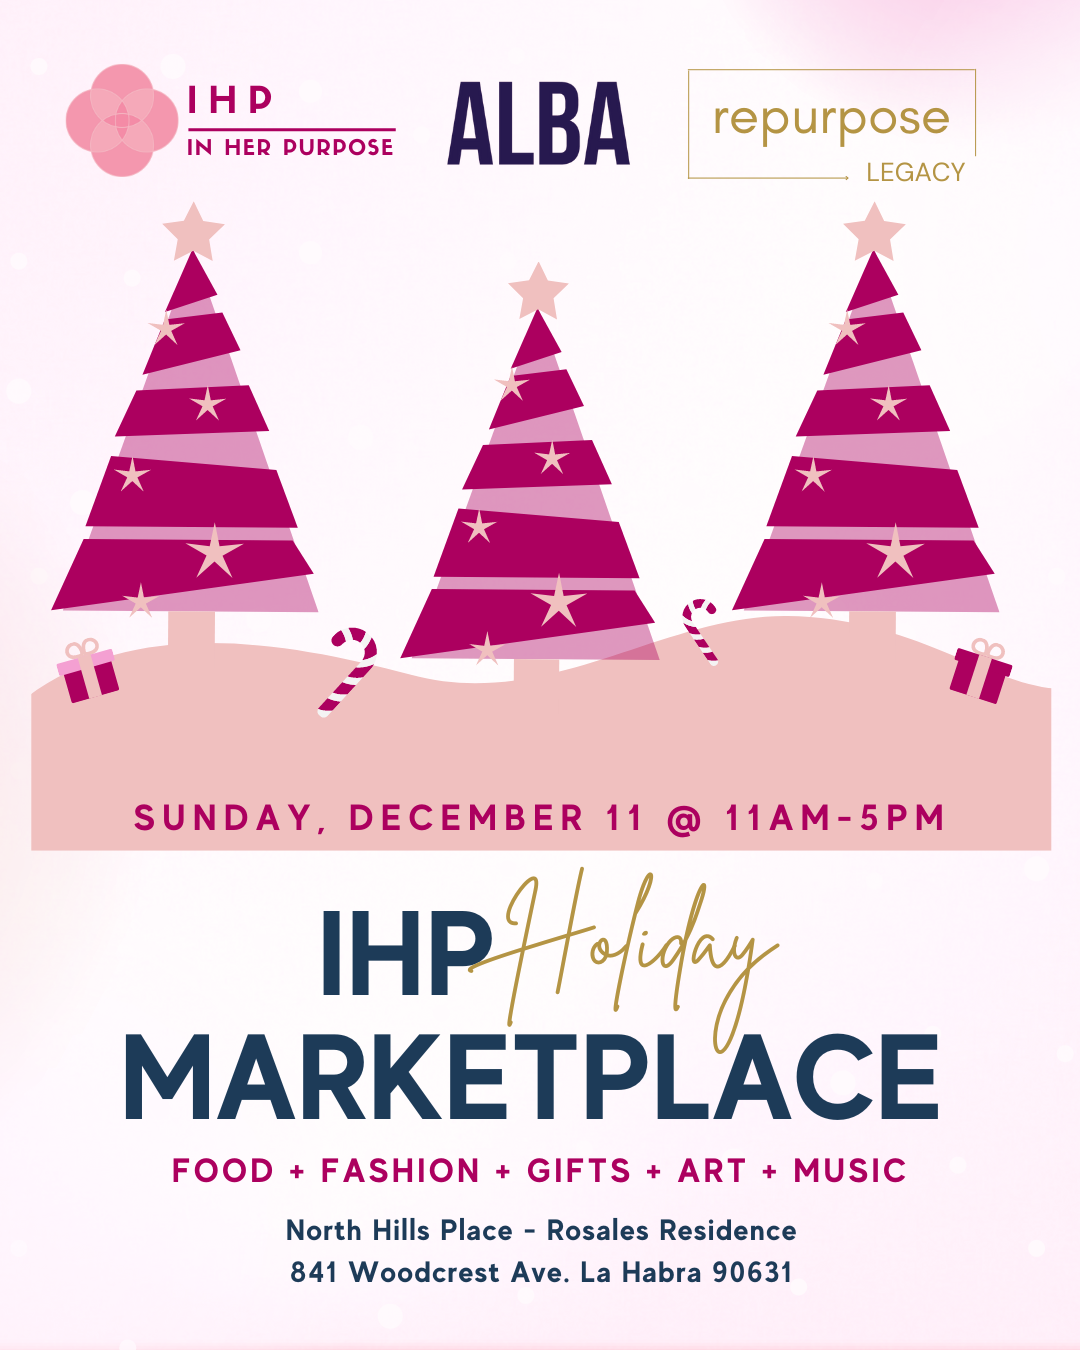 IHP Holiday Marketplace - VENDOR SIGN UPS - RESERVE YOUR SPOT.